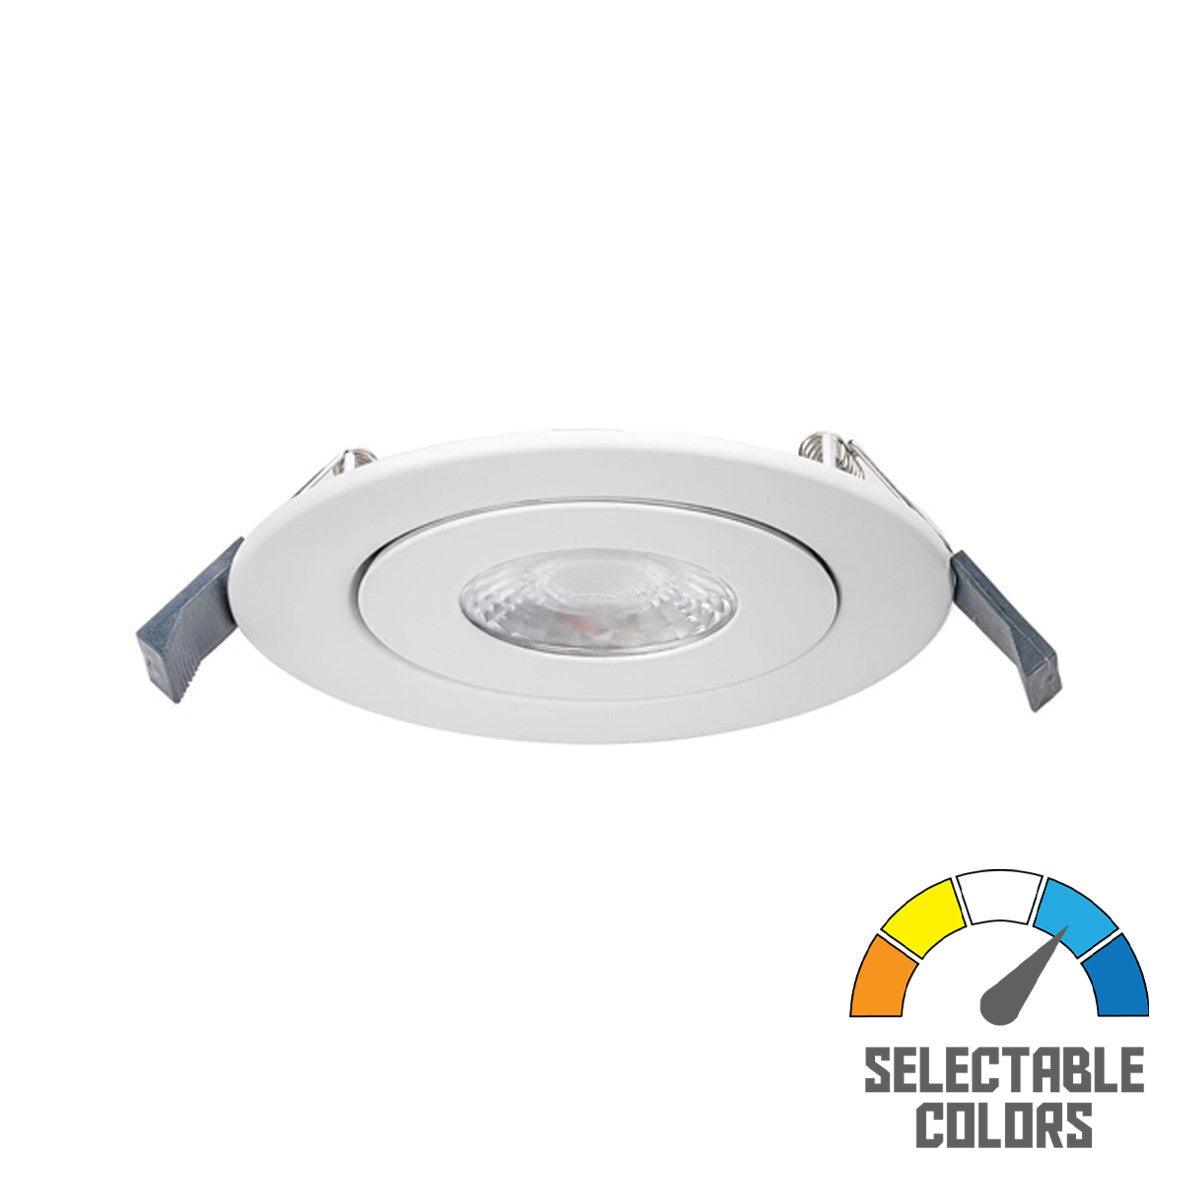 4 In. Lotos LED Adjustable Canless LED Recessed Light, 15 Watt, 800 Lumens, Selectable CCT, 2700K to 5000K, 120/277V